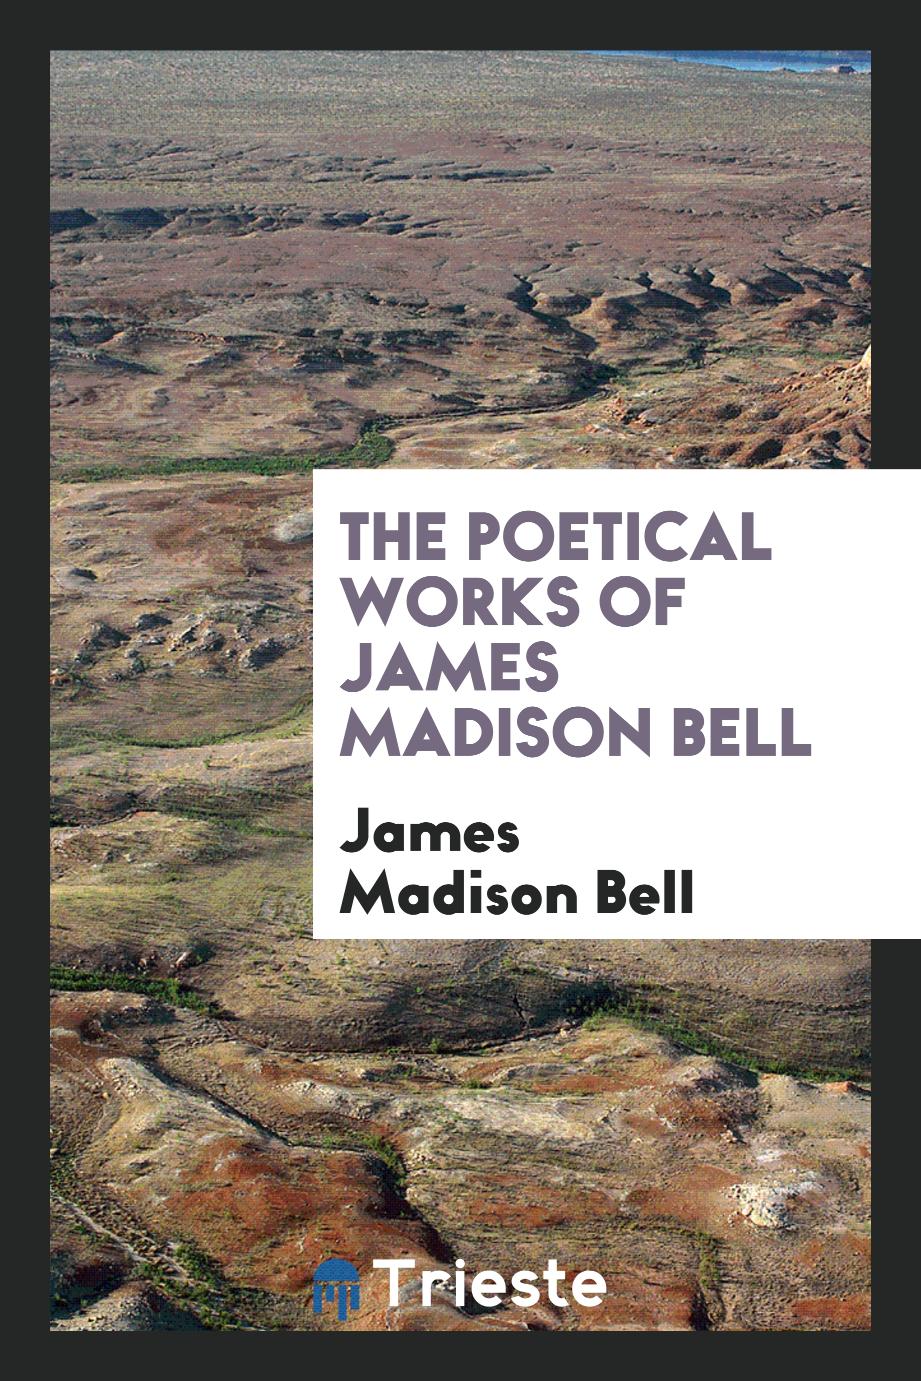 The poetical works of James Madison Bell